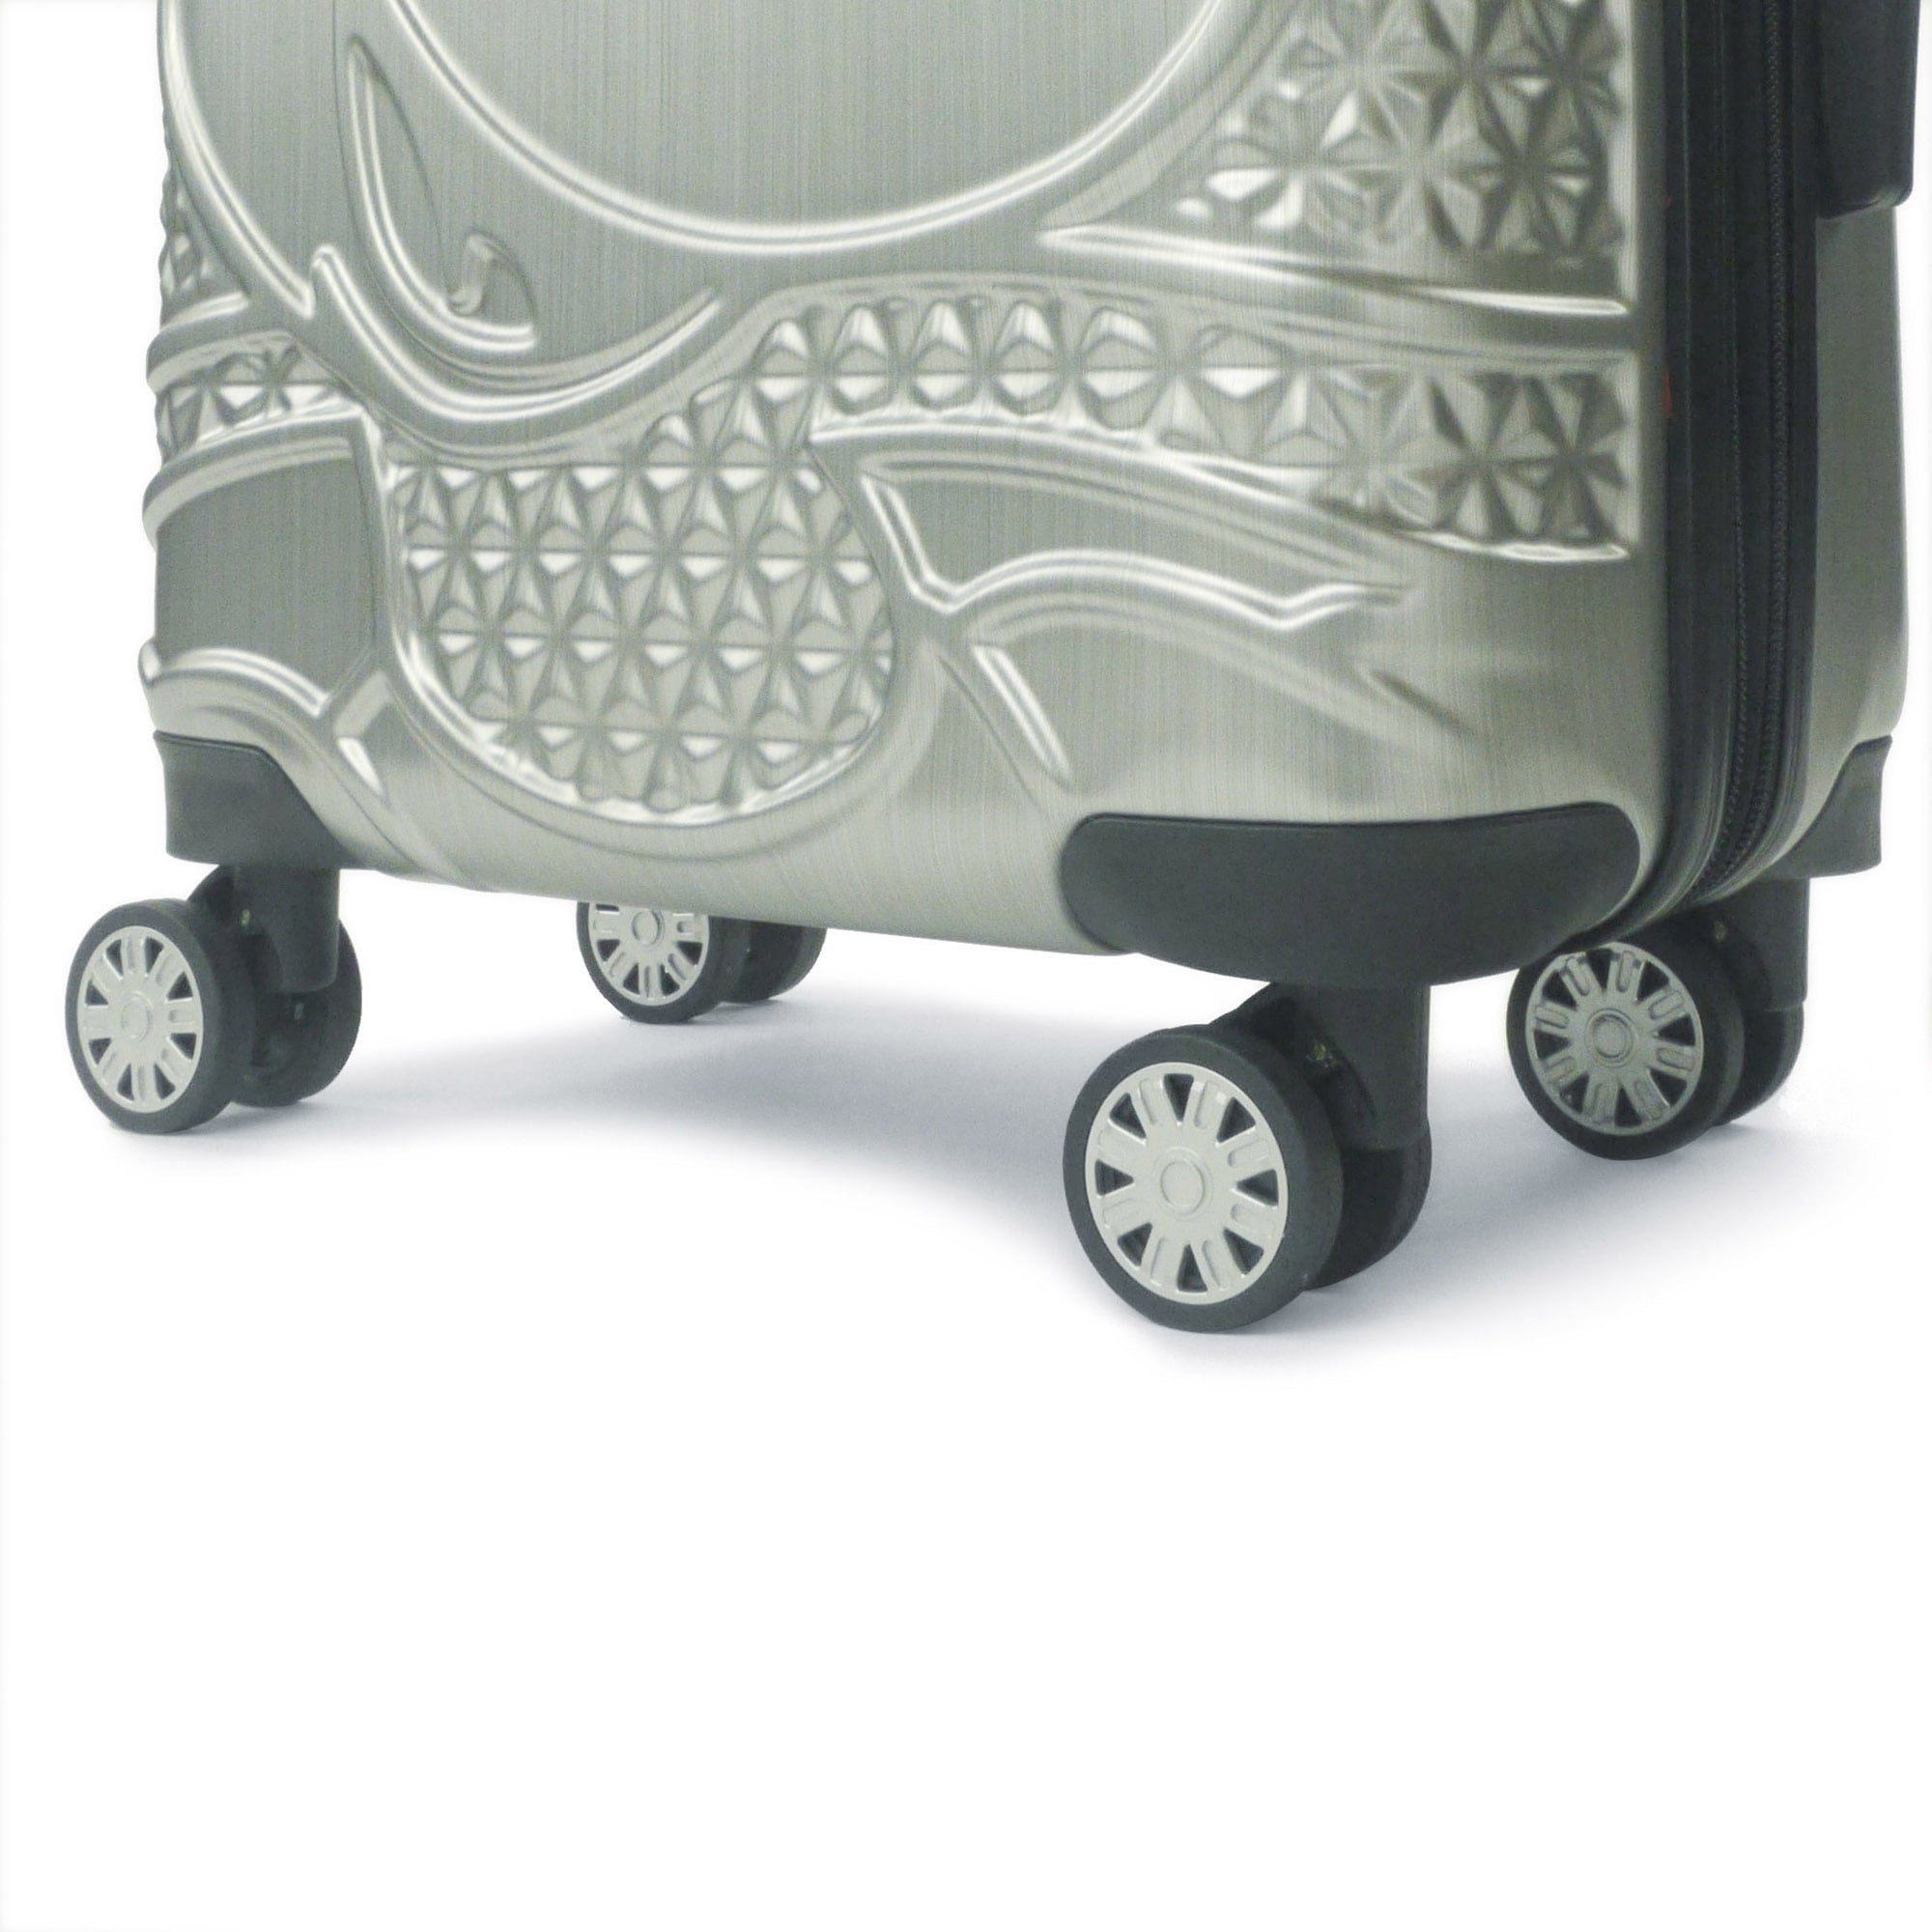 FUL Disney Textured Mickey Mouse Hard Sided 3 Piece Luggage Set, Silver,  29